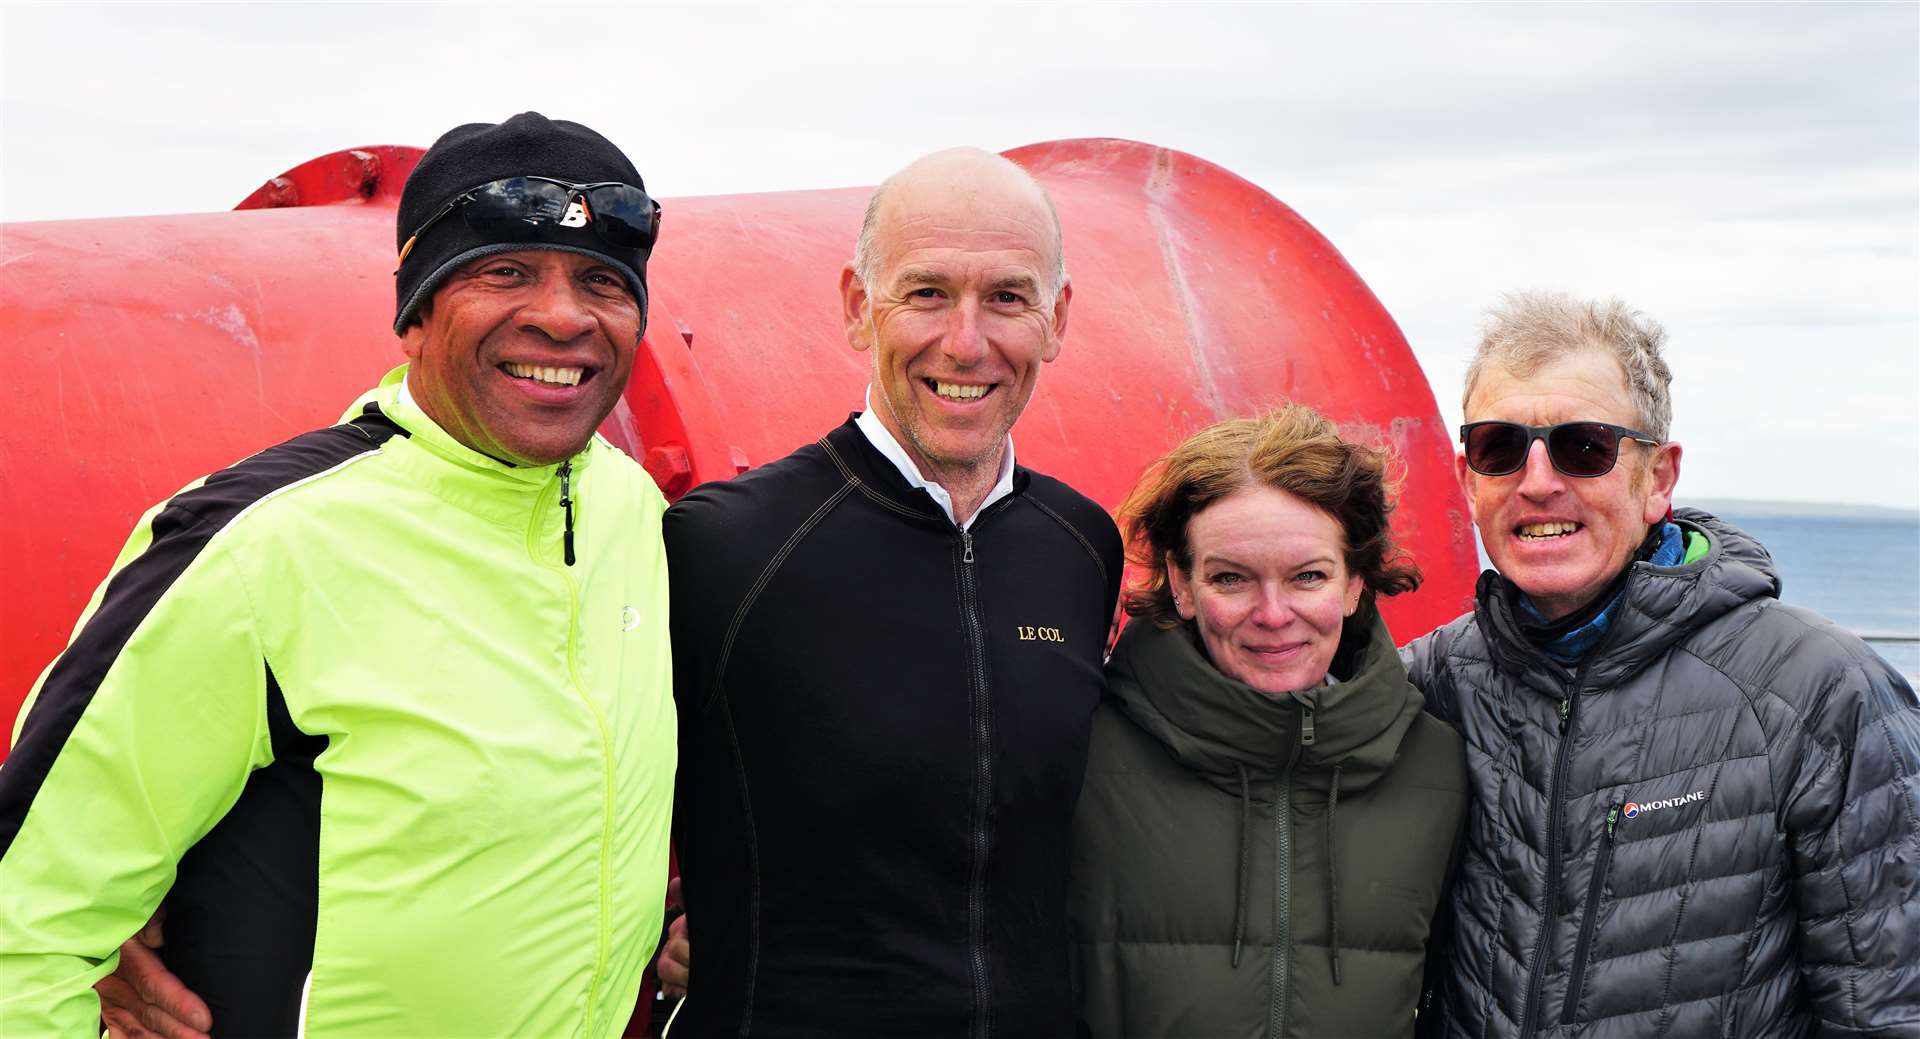 The Spectrum team at John O'Groats with, from left, Andrew Antrobus, Jason McGowan, Gila Freudenthal and Ian McClelland. Picture: DGS